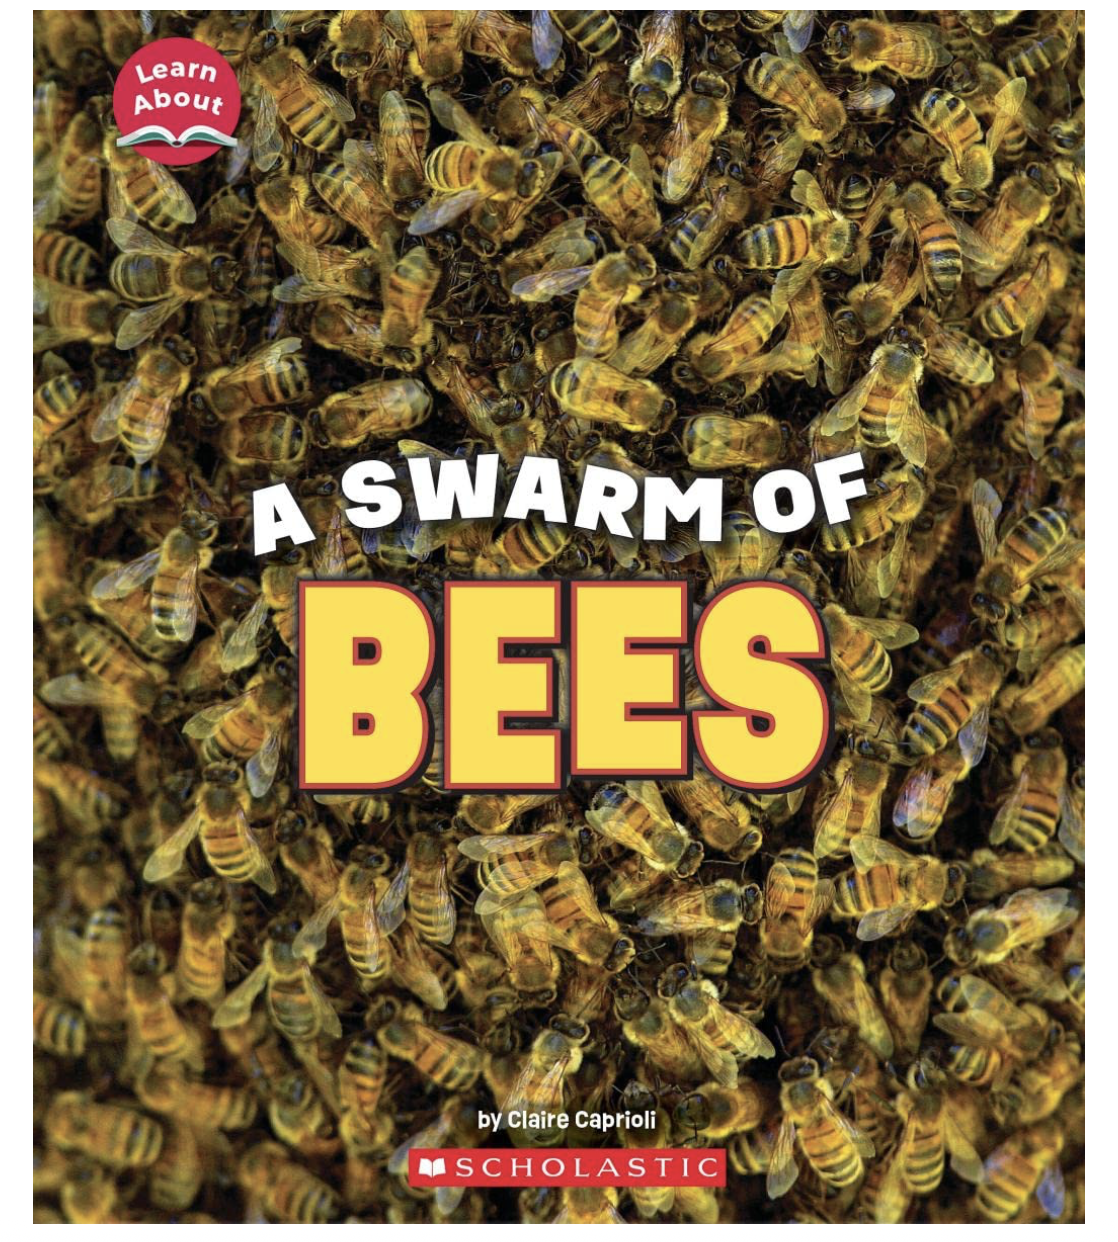 Cover for A Swarm Of Bees (Learn About: Animals)